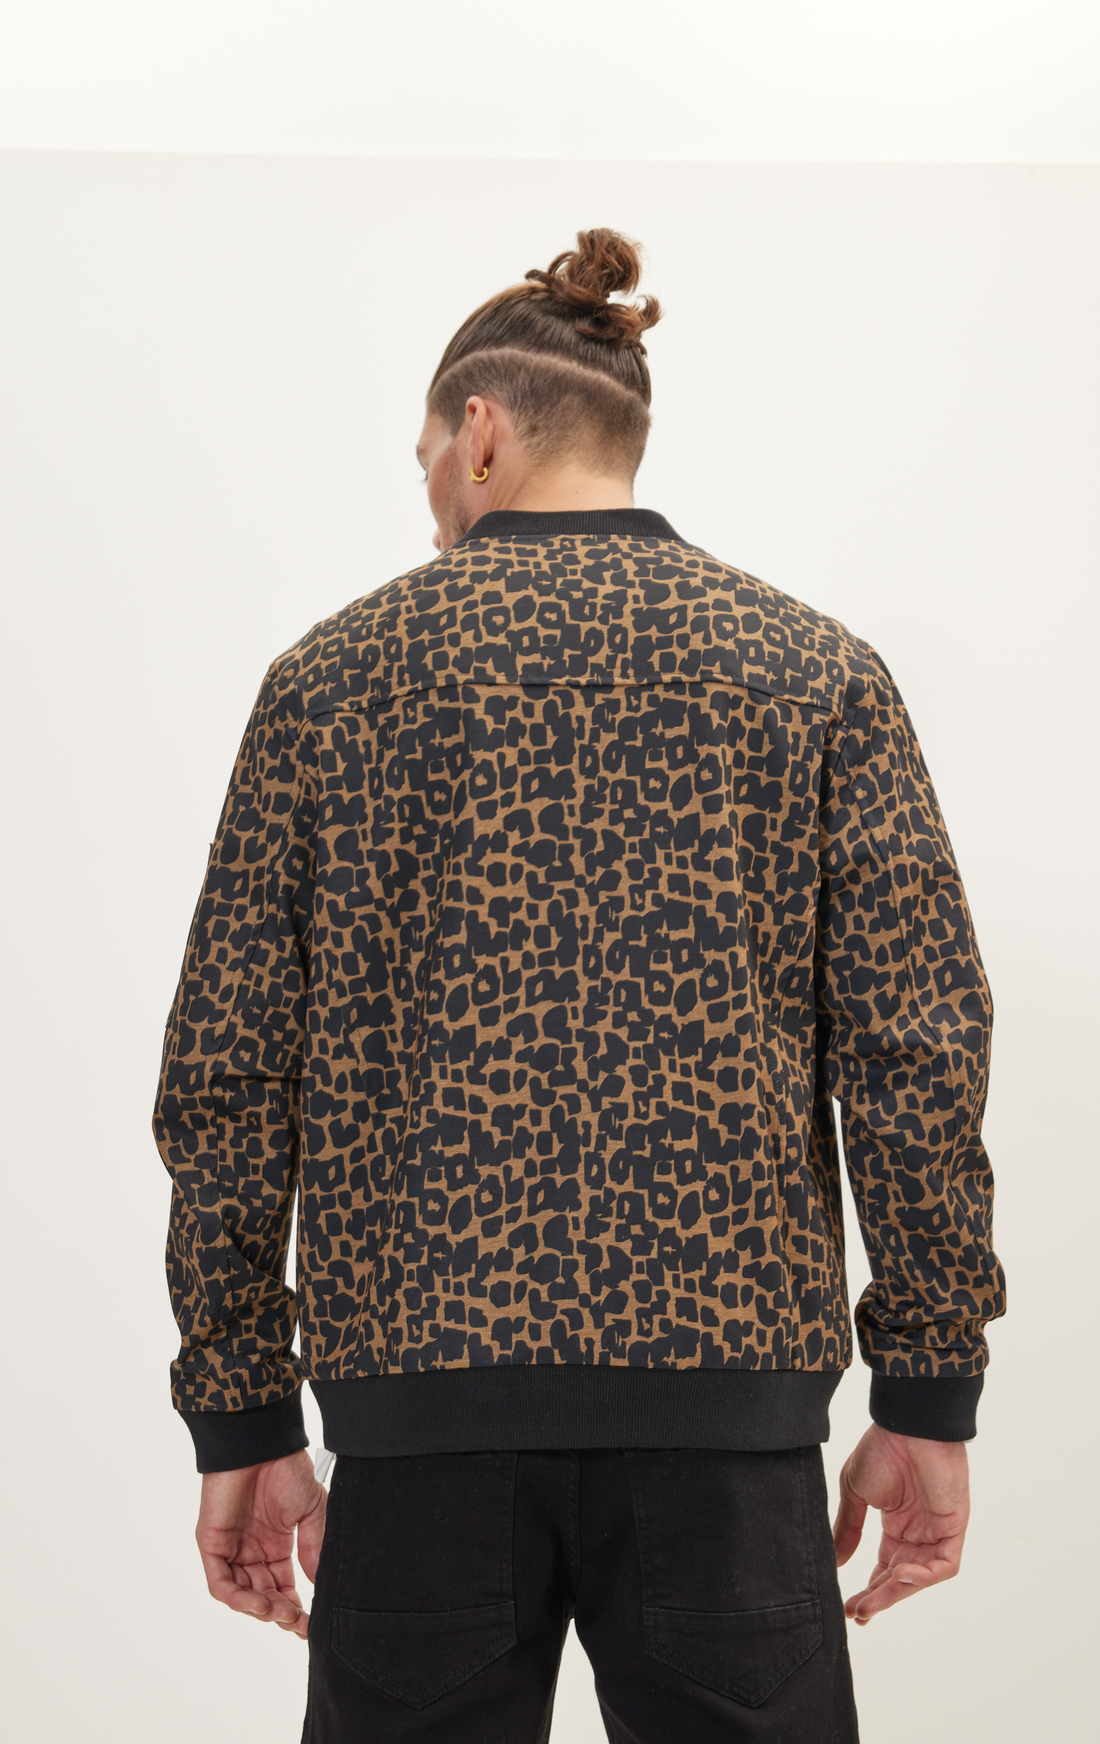 N° 71305 ABSTRACT BOMBER - CAMEL